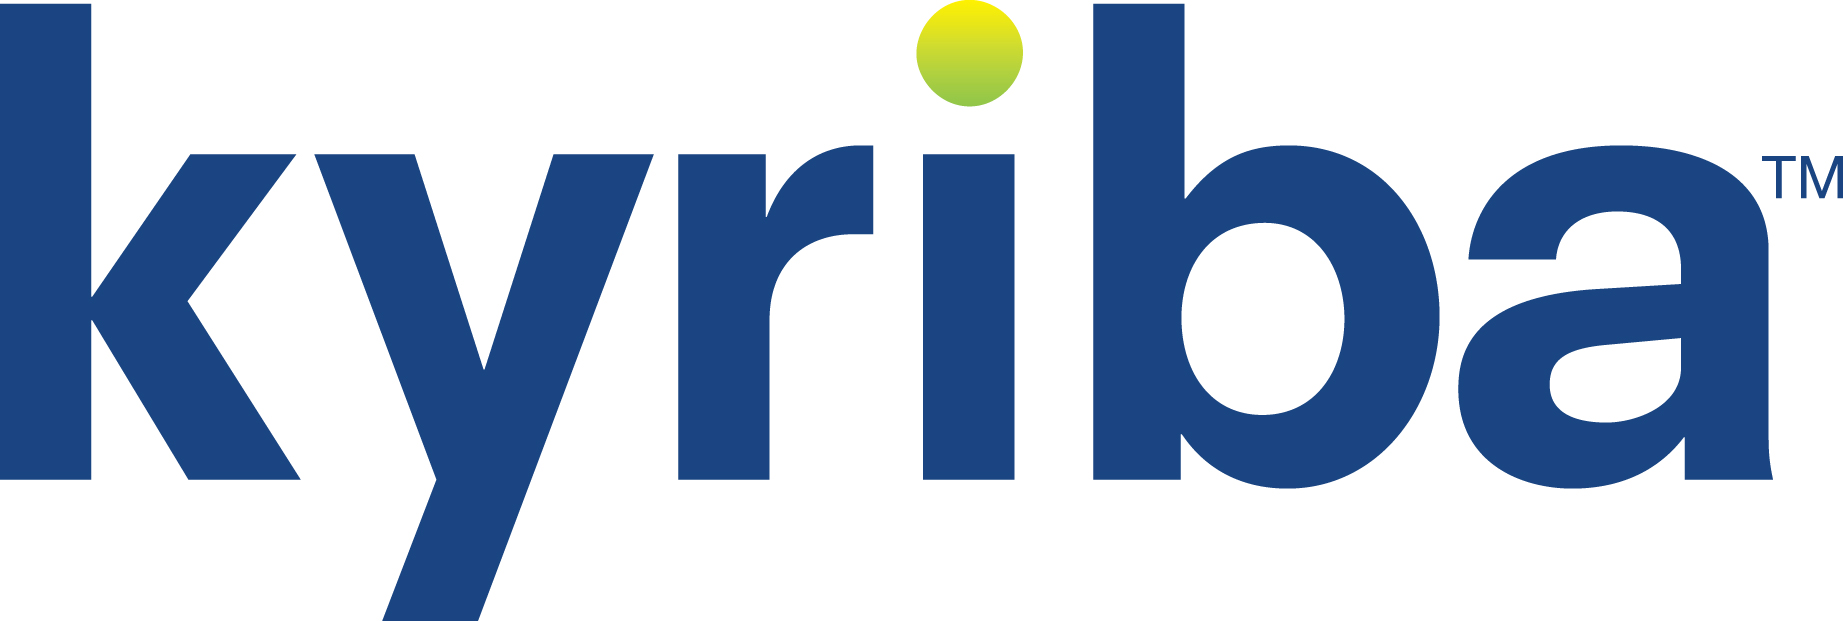 Kyriba Closes $160 Million Growth Round Led by Bridgepoint to Fuel Enterprise Platform Innovation and Global Expansion 